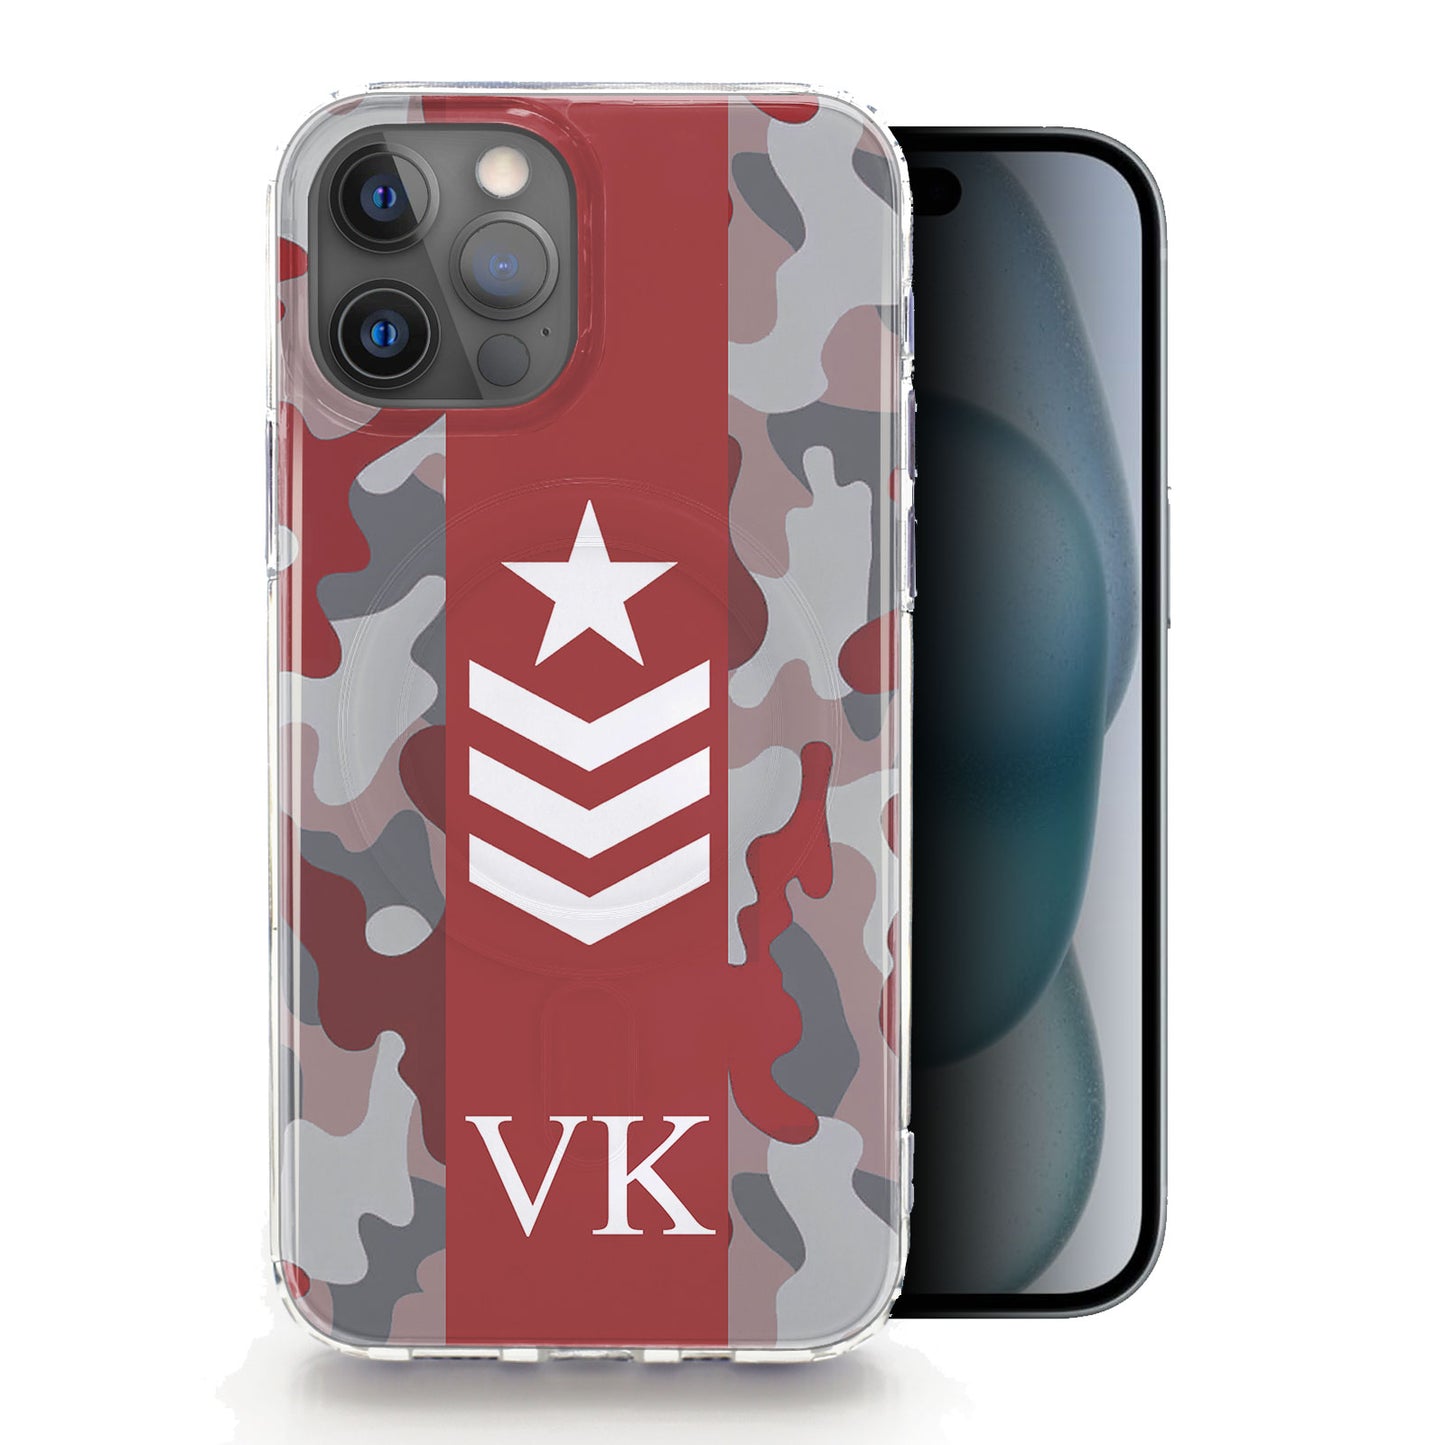 Personalised Magsafe iPhone Case - Red Camo and Initials